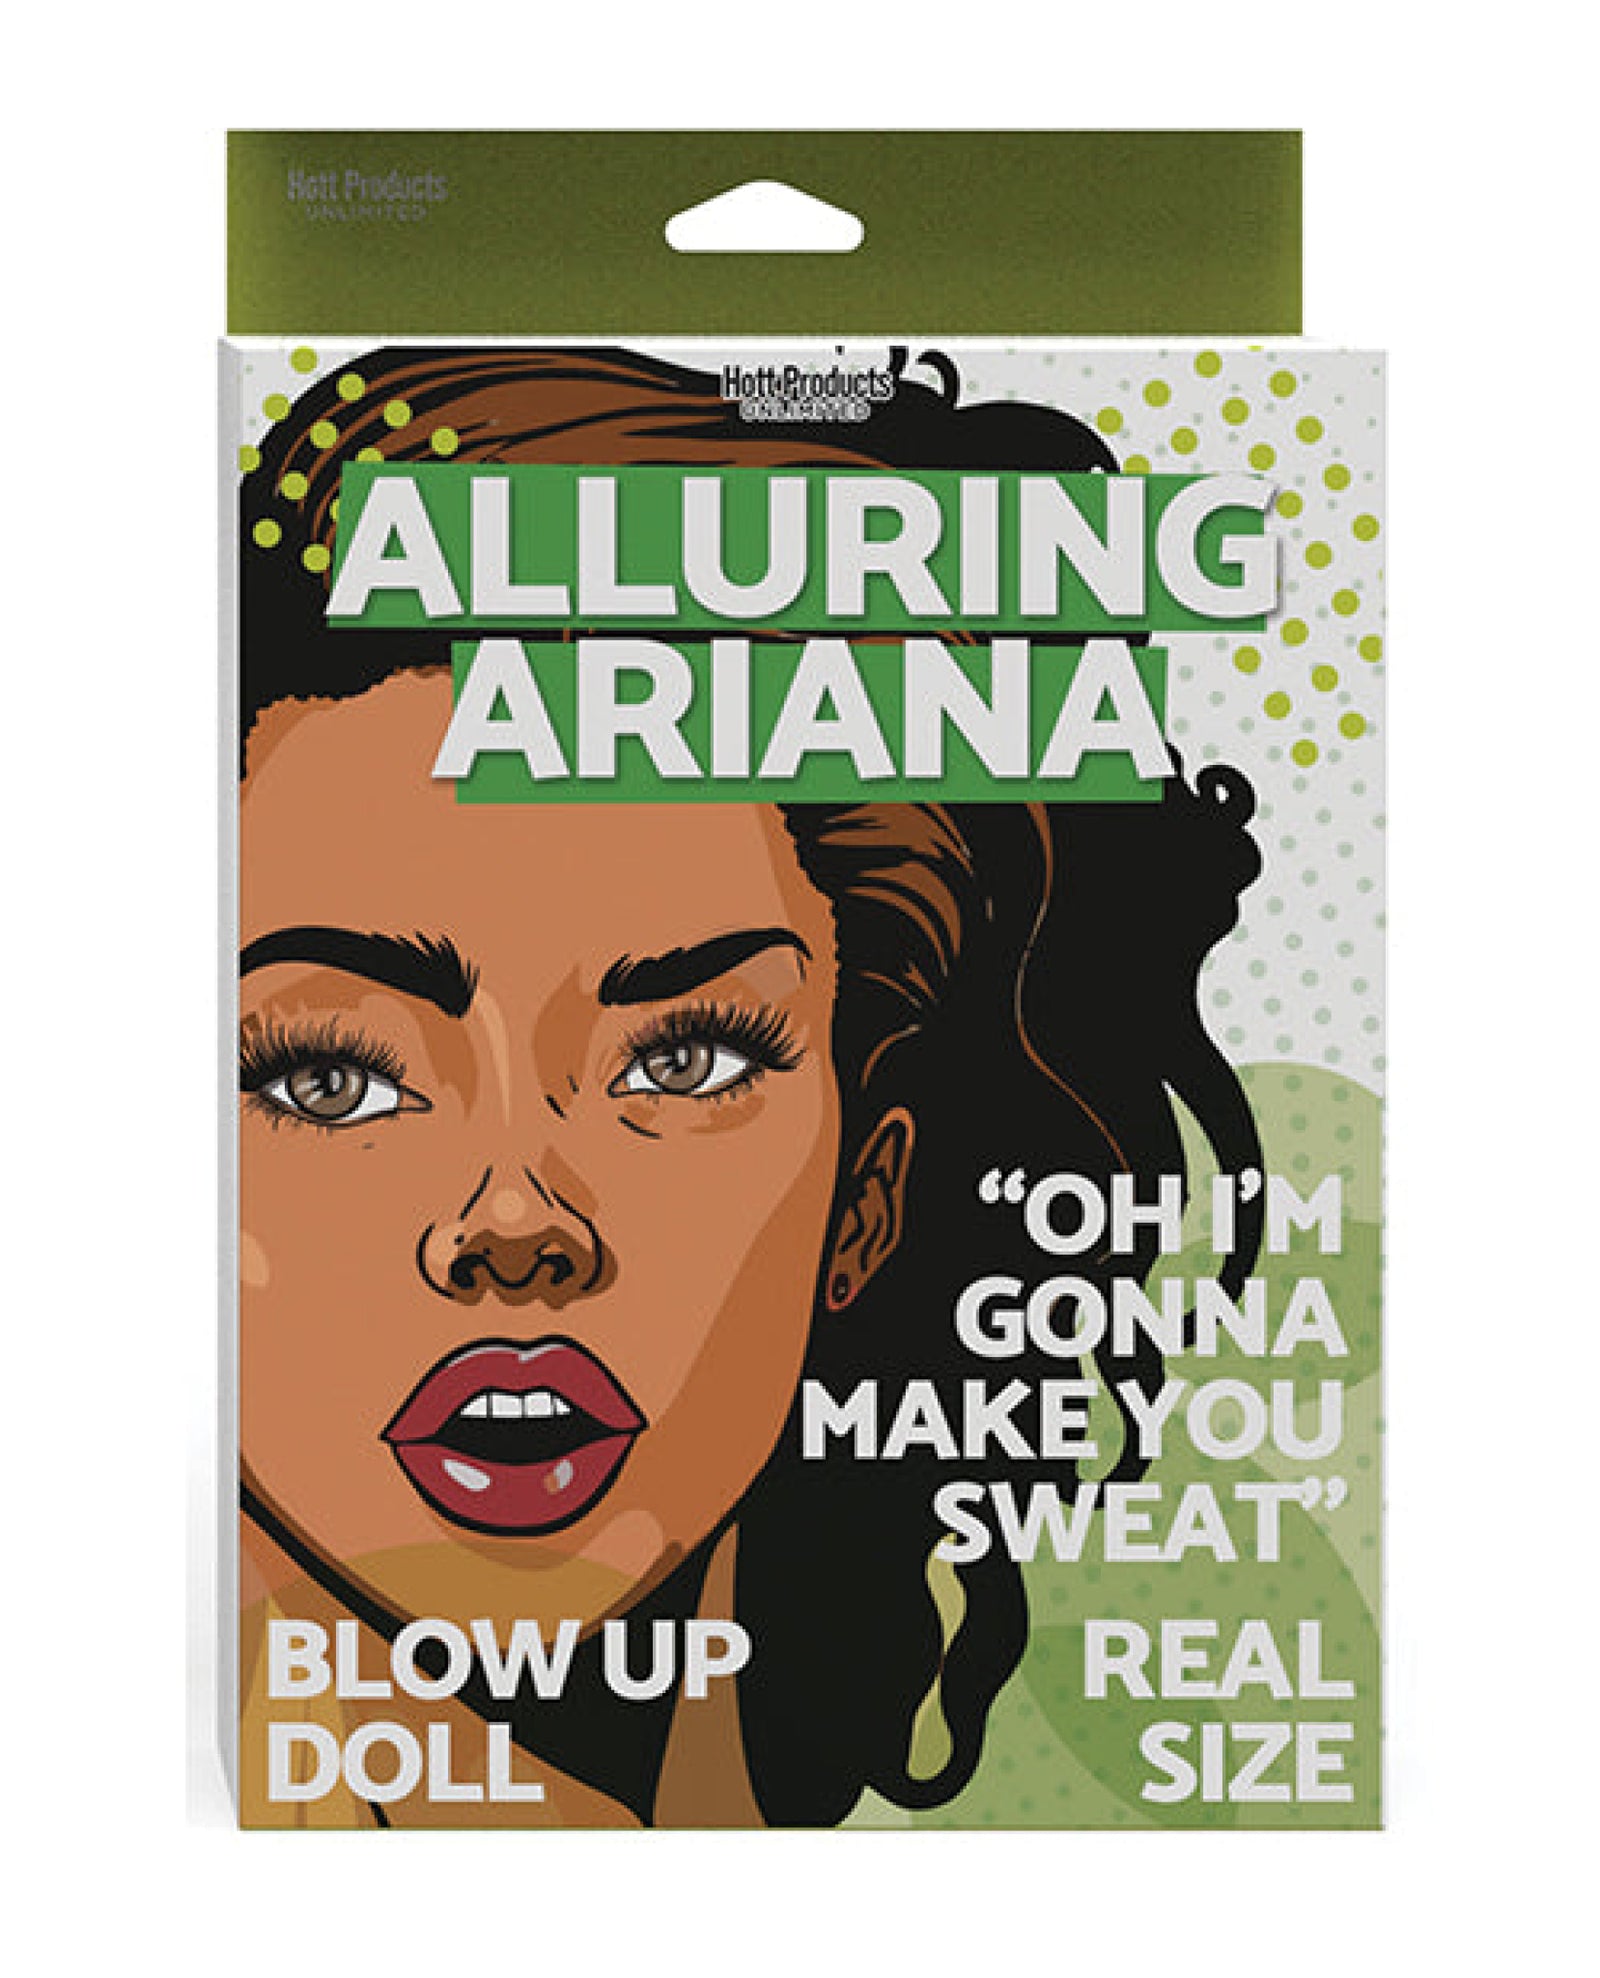 Blow Up Doll - Alluring Ariana Hott Products